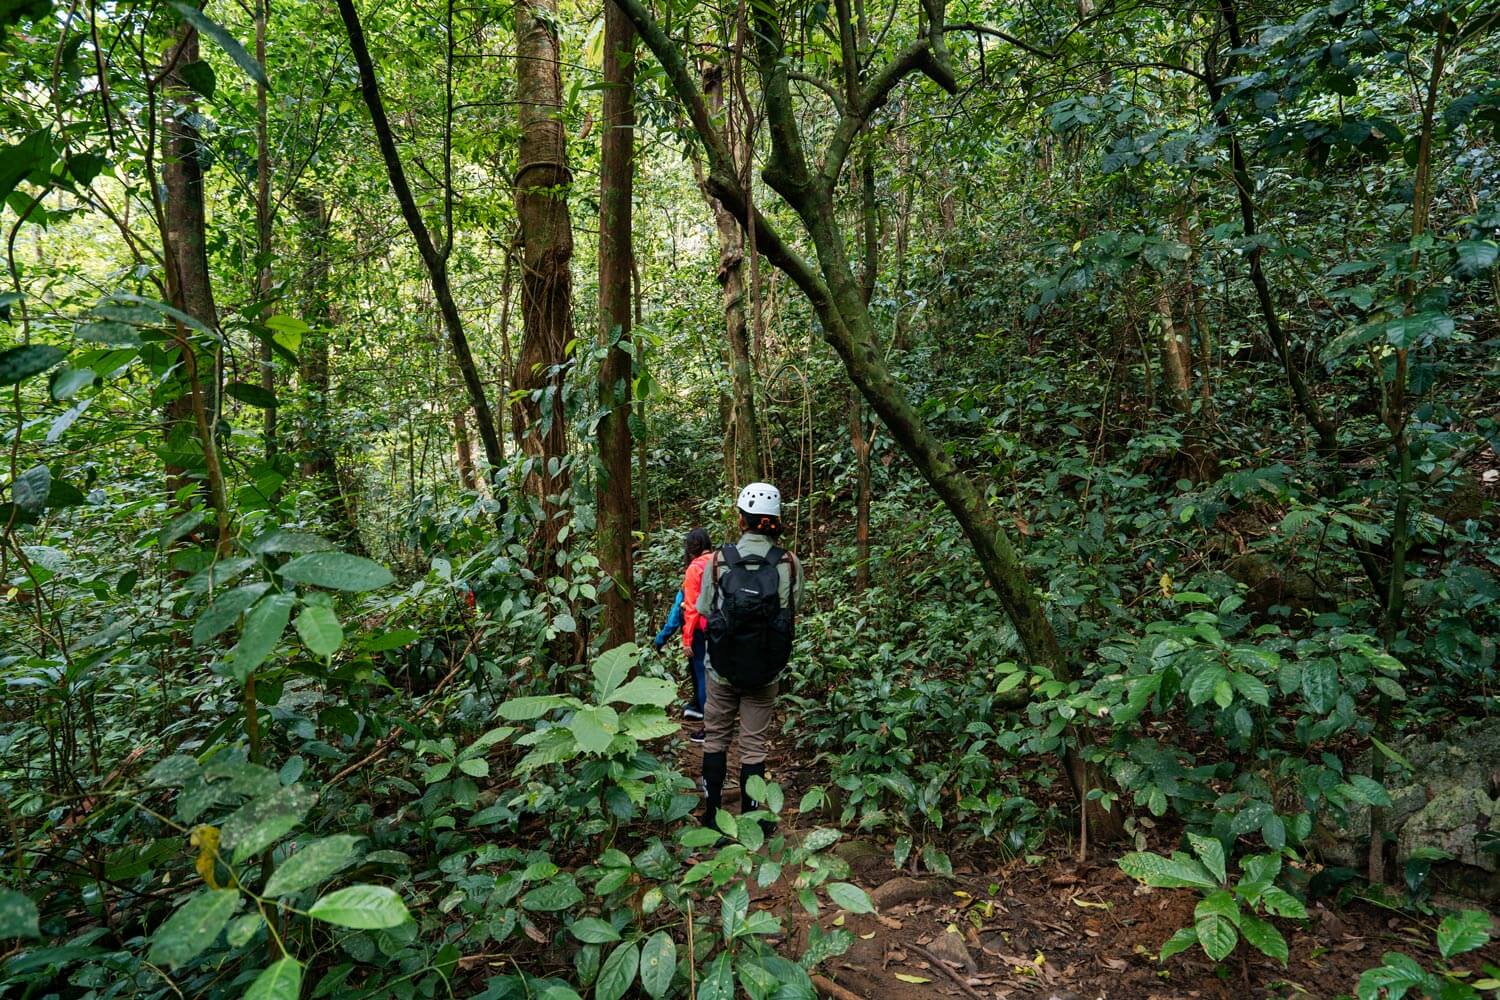 The entire trekking route to Hang Va Cave is covered with lush green trees, providing a cool and refreshing atmosphere.